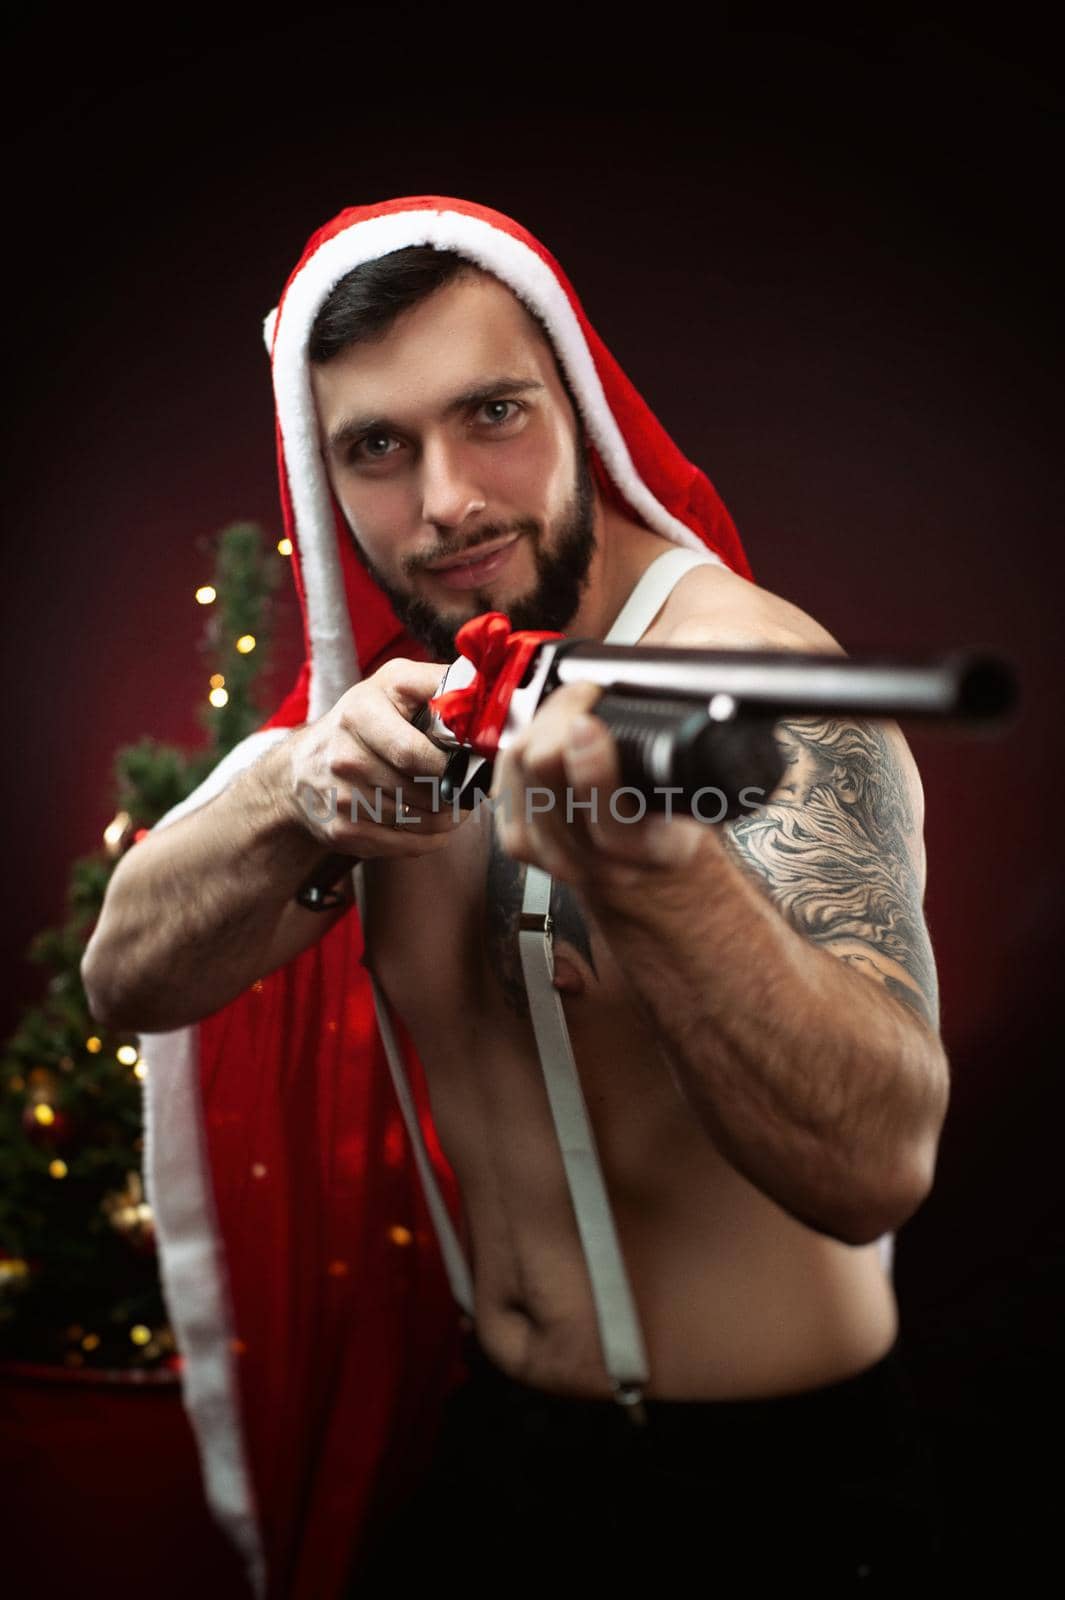 strong guy in a red Santa Claus cape at the Christmas tree with a shotgun in his hands